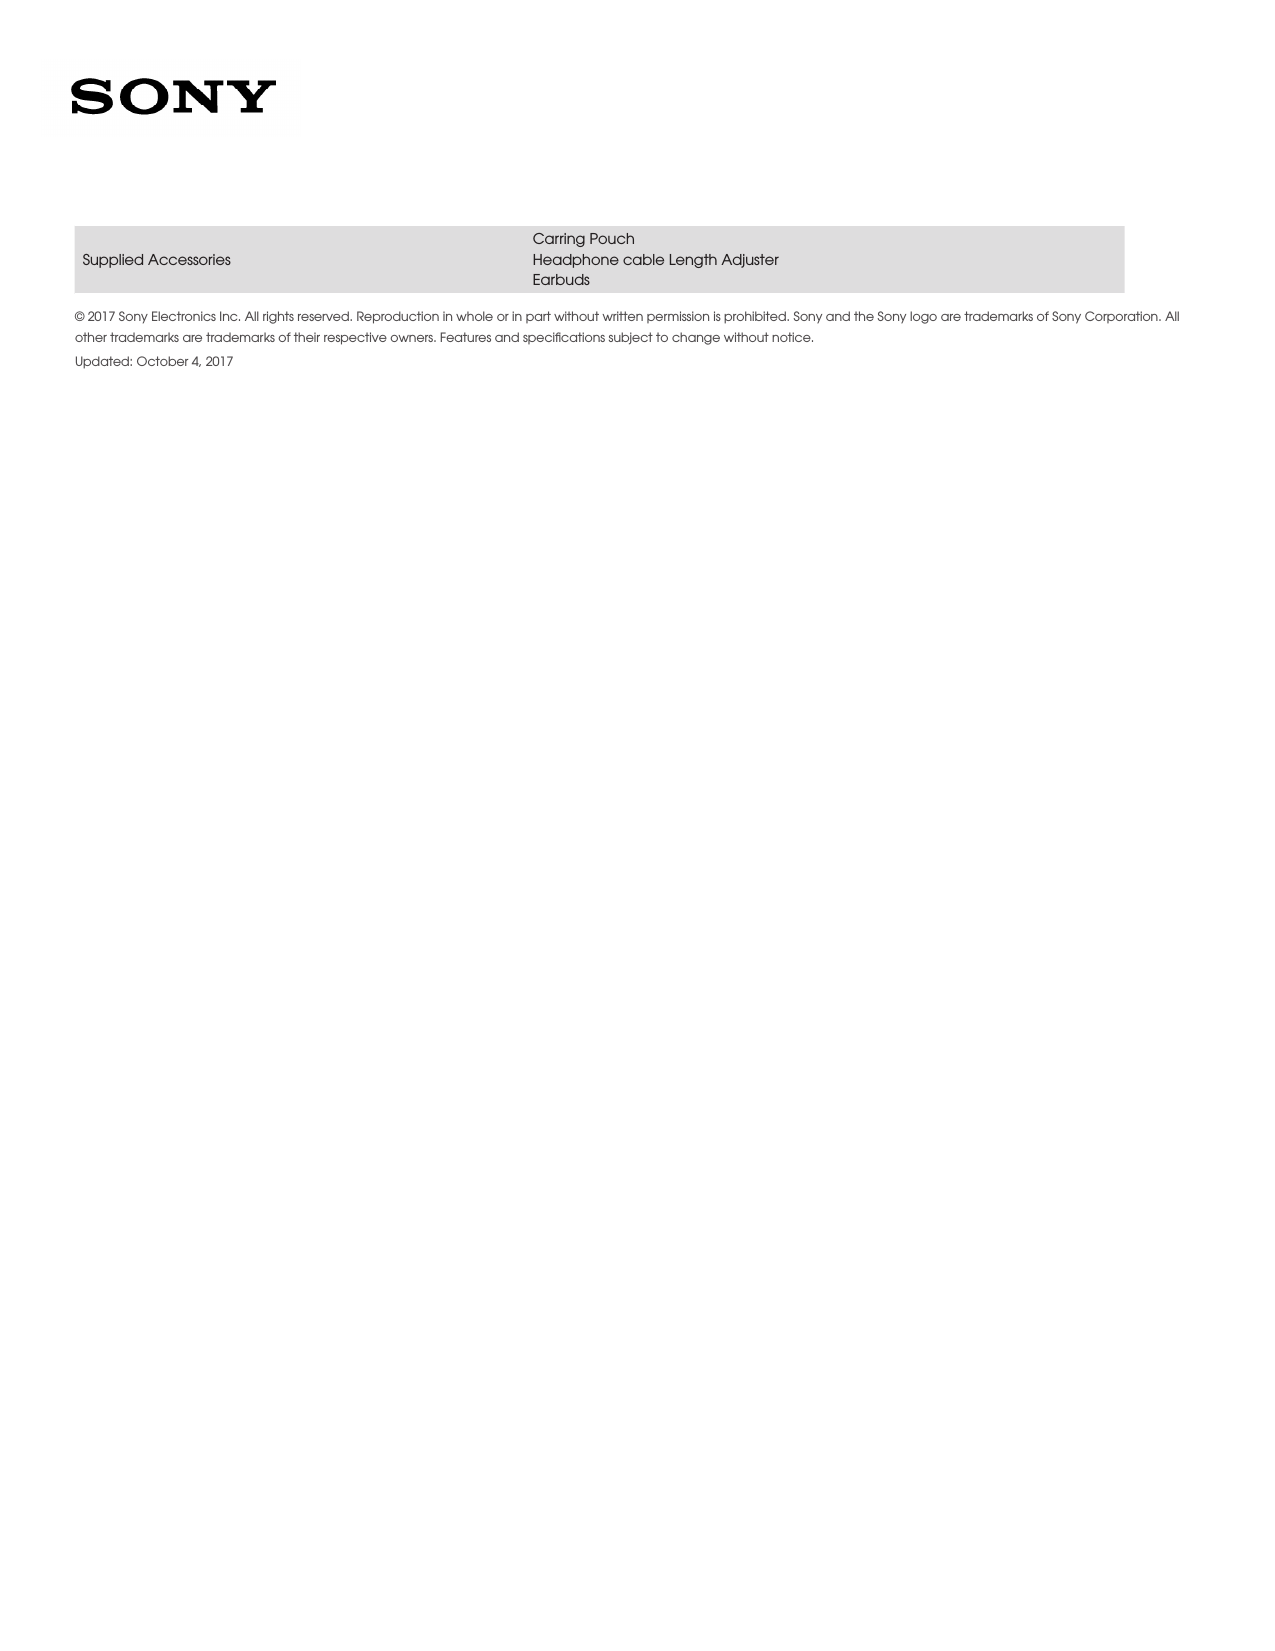 Page 2 of 2 - Sony IER-H500A User Manual Marketing Specifications (Black ) IERH500AB Mksp